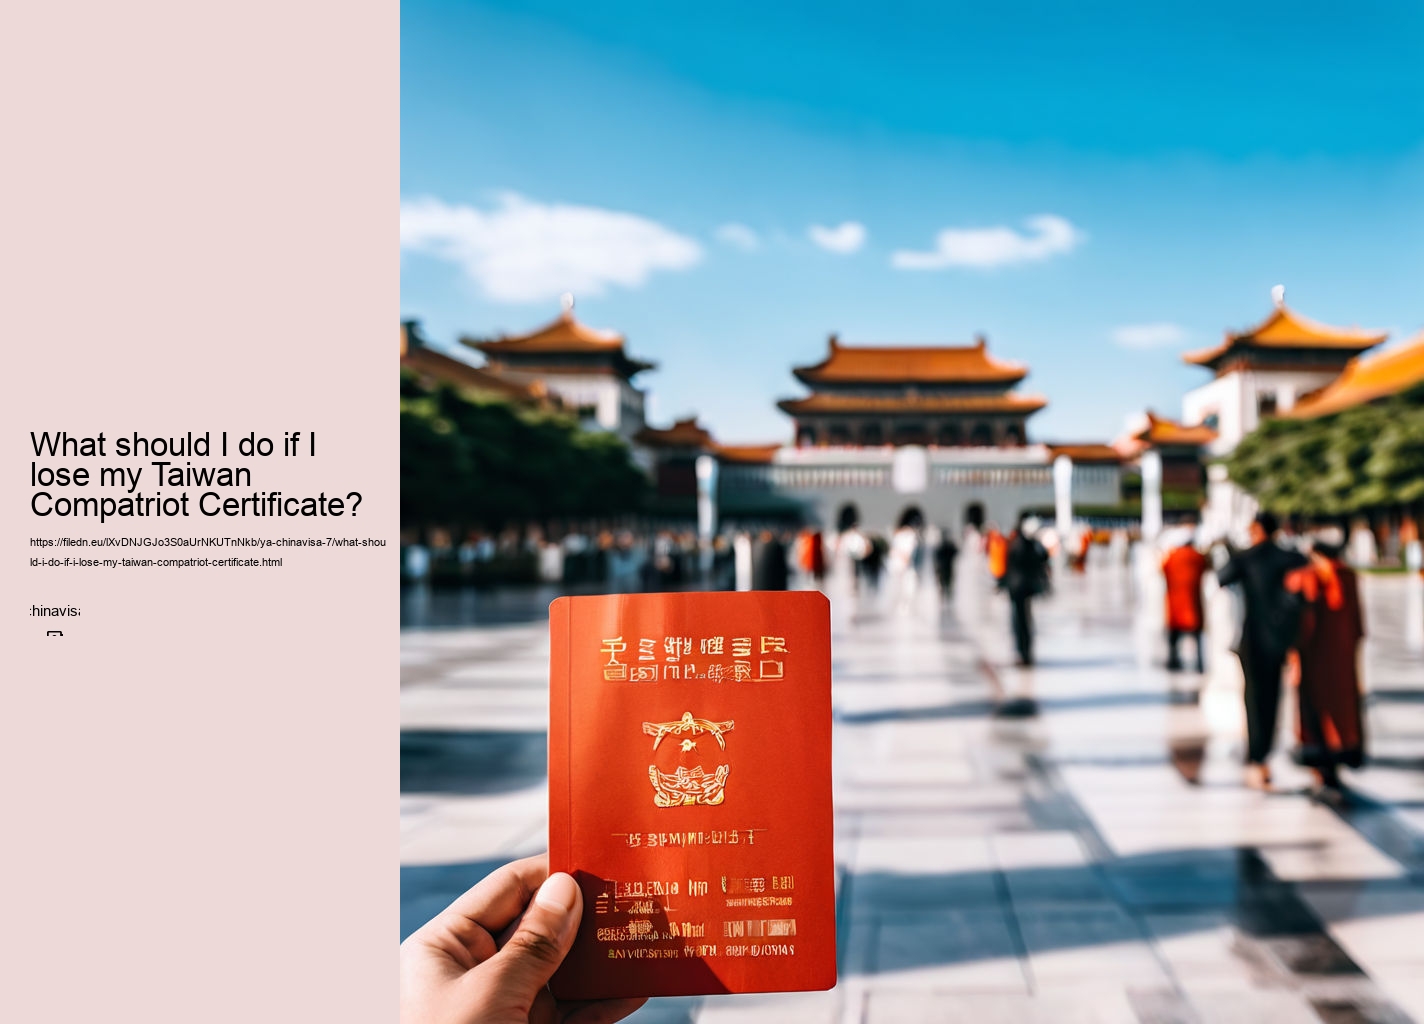 What should I do if I lose my Taiwan Compatriot Certificate?